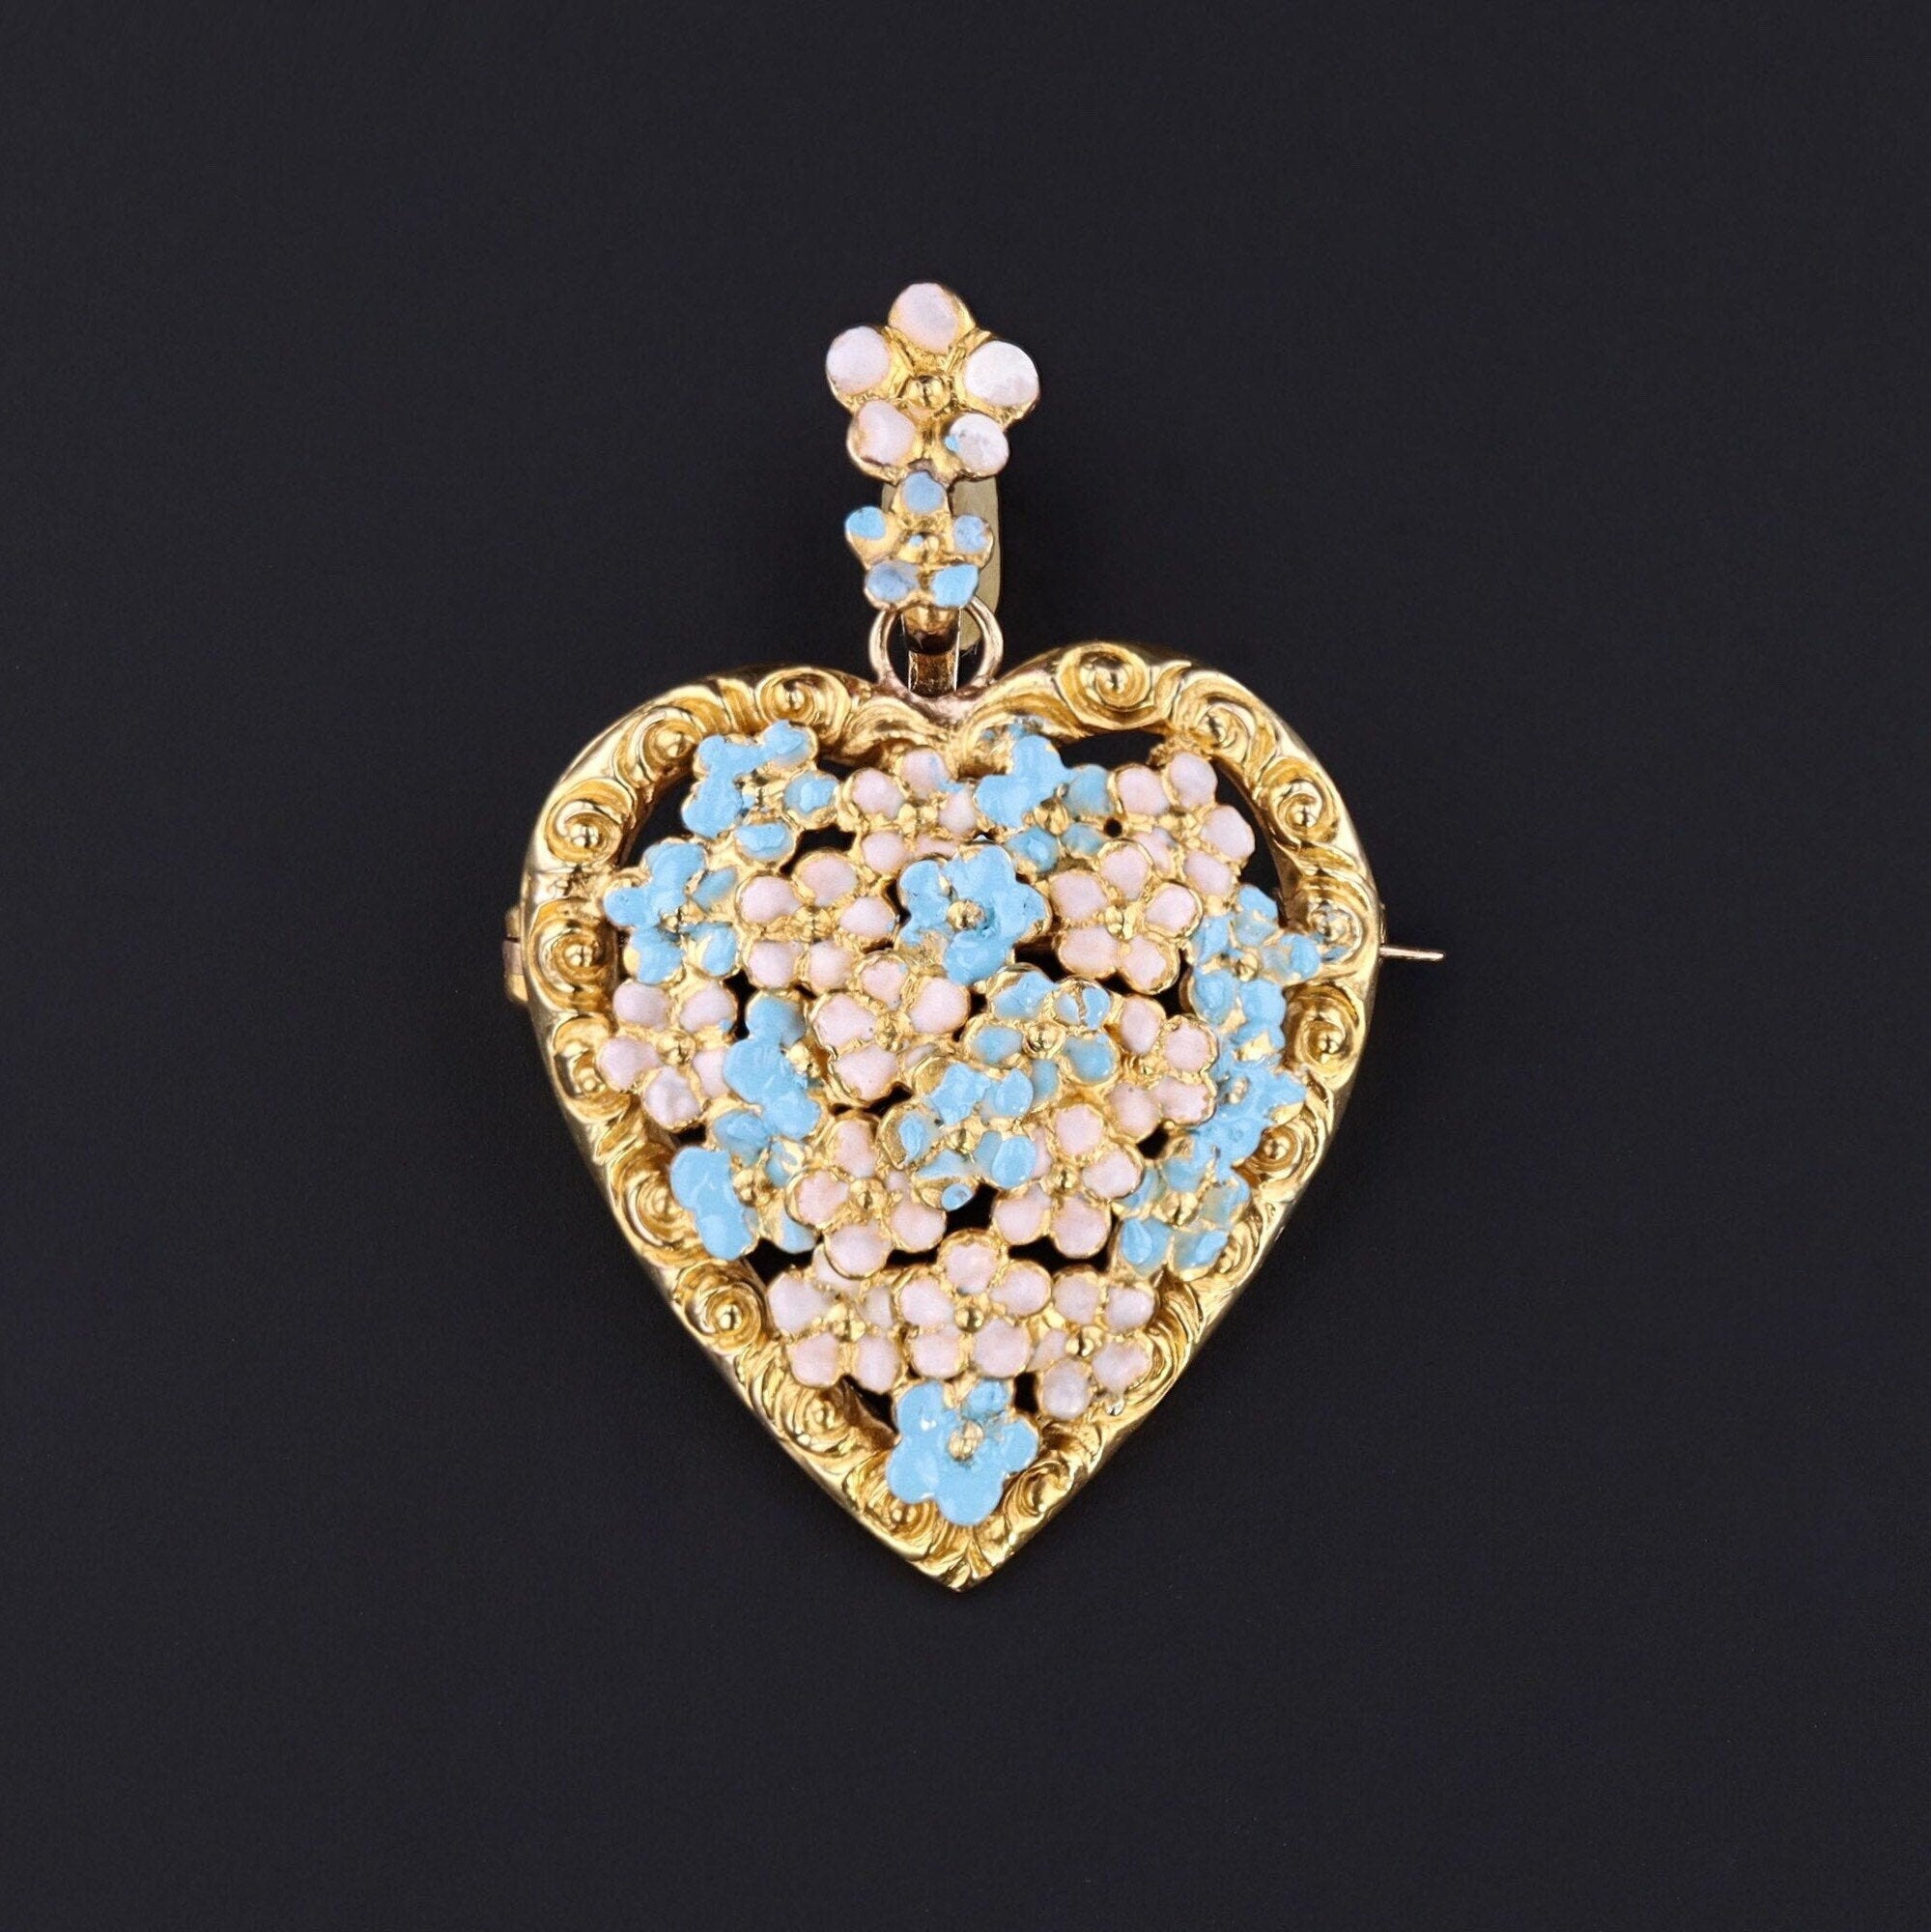 Antique Forget-Me-Not Heart Pendant | 14k Gold Pendant or Brooch 